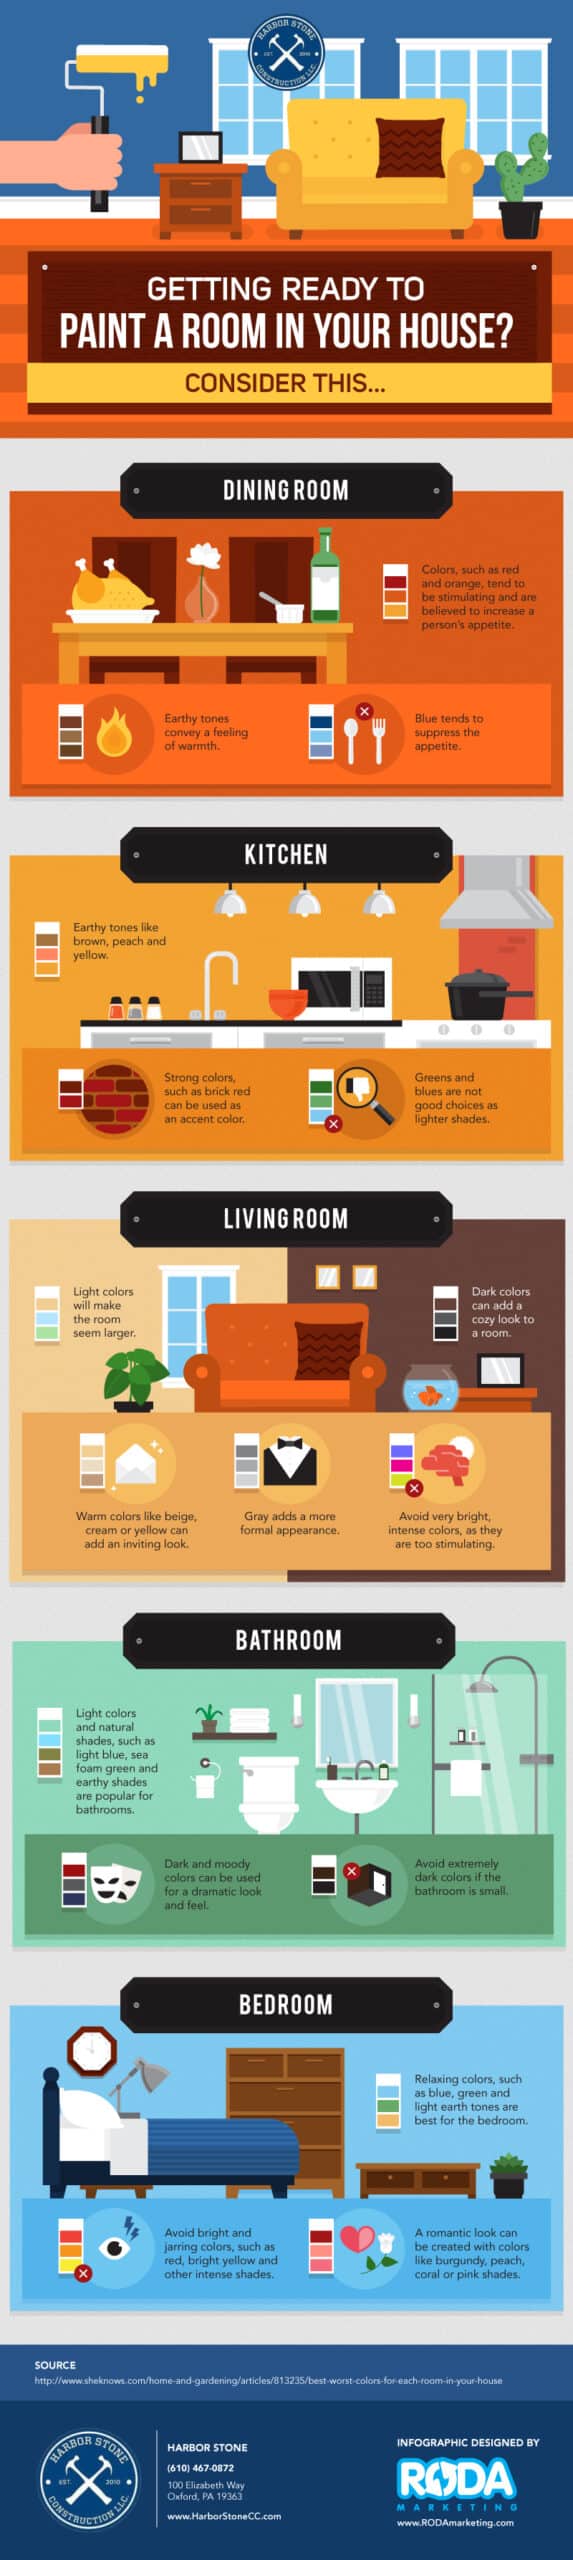 Getting ready to paint a room in your house? Infographic